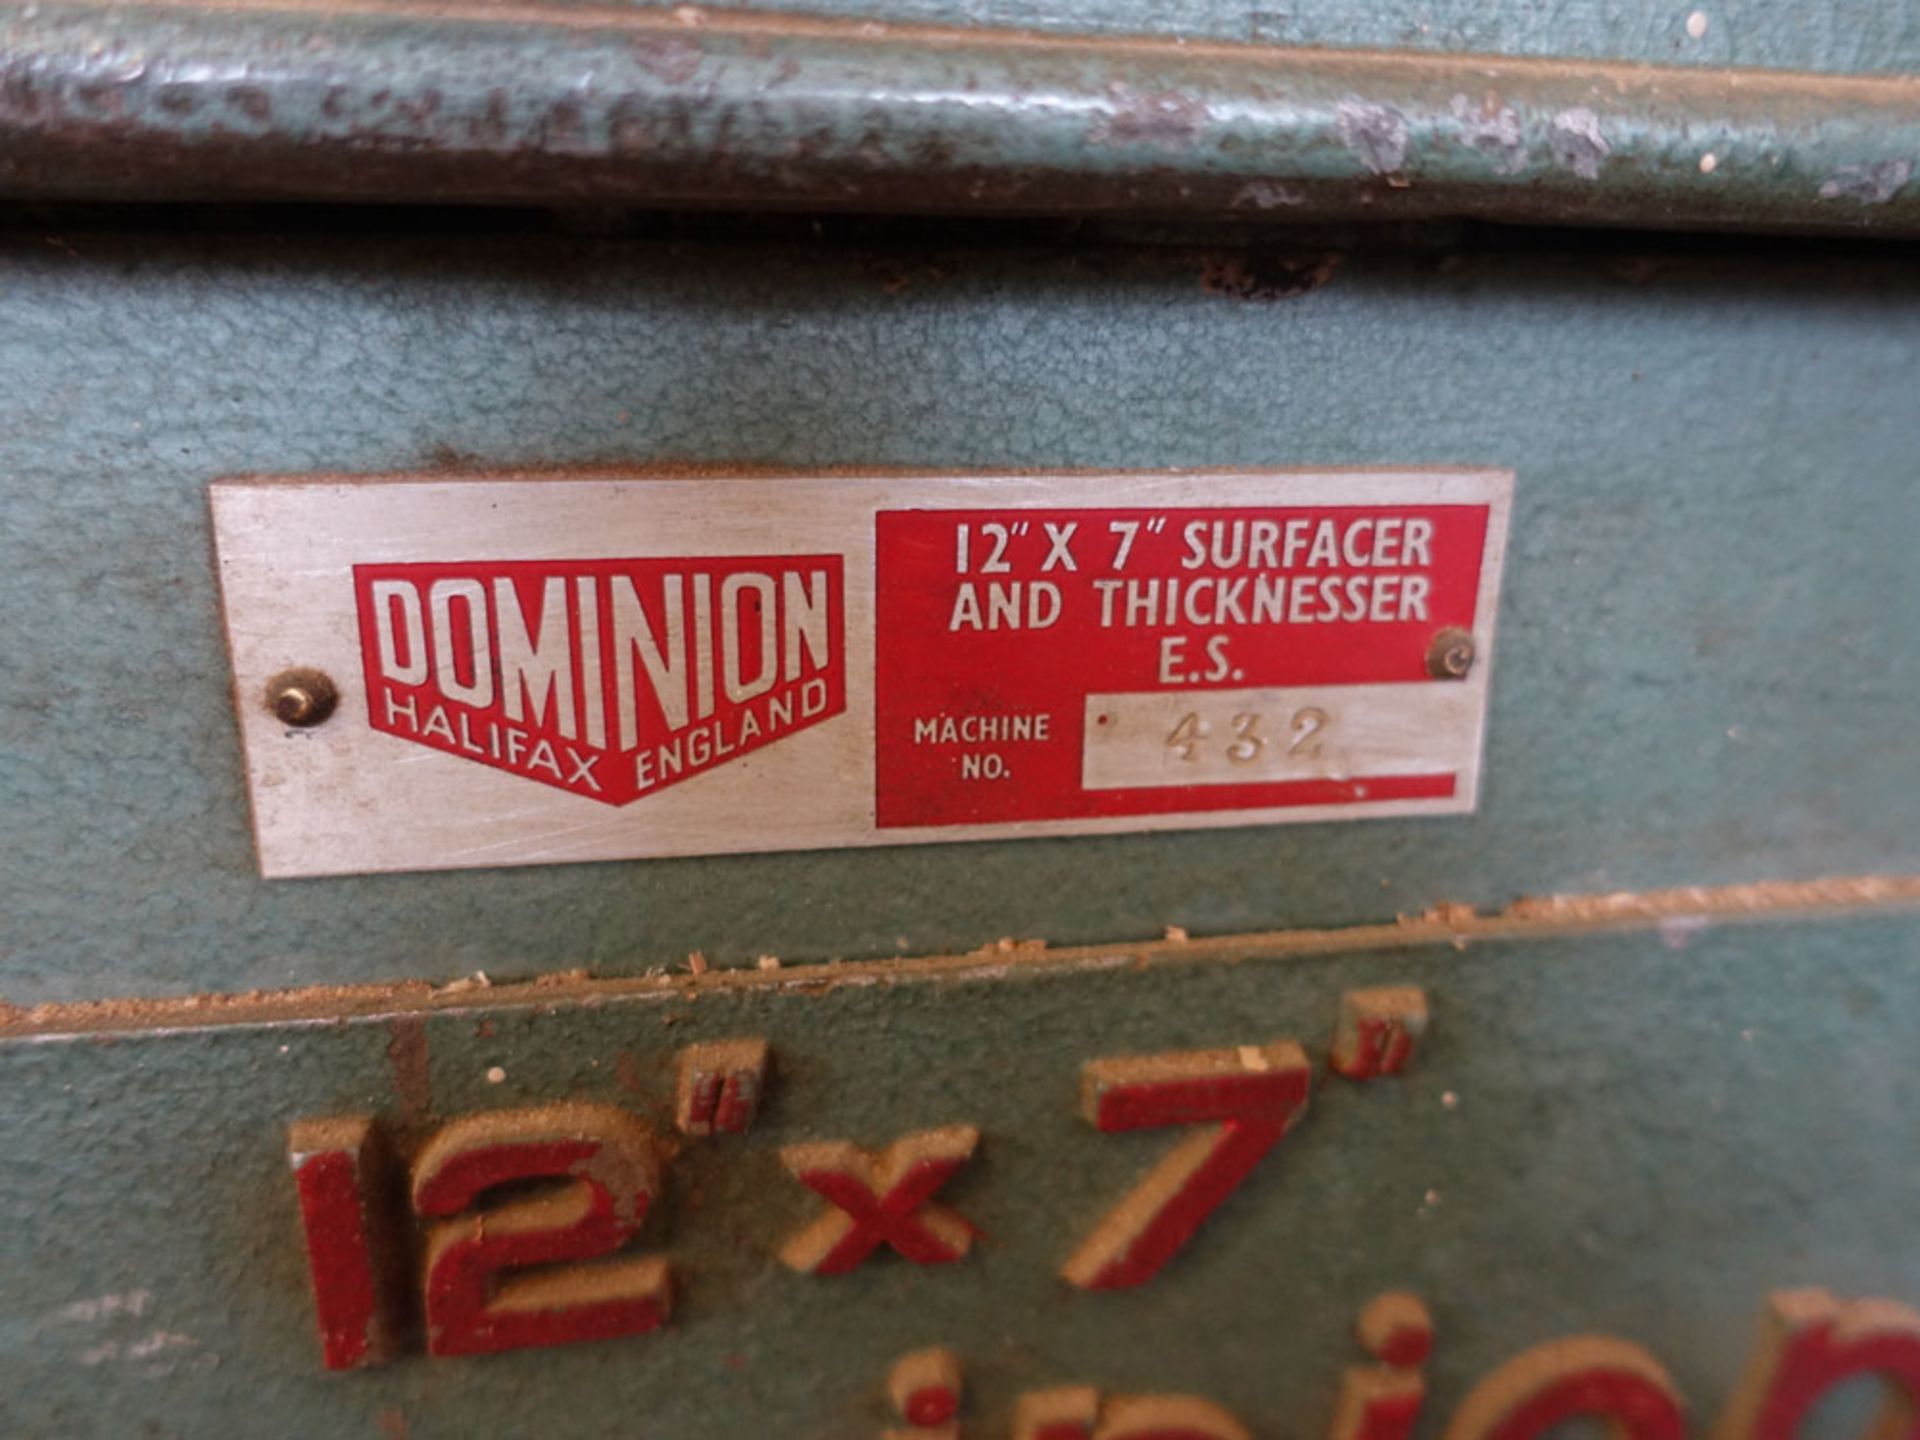 Dominion 12'' x 7'' planer thicknesser model ES, serial no 432 - Image 3 of 3